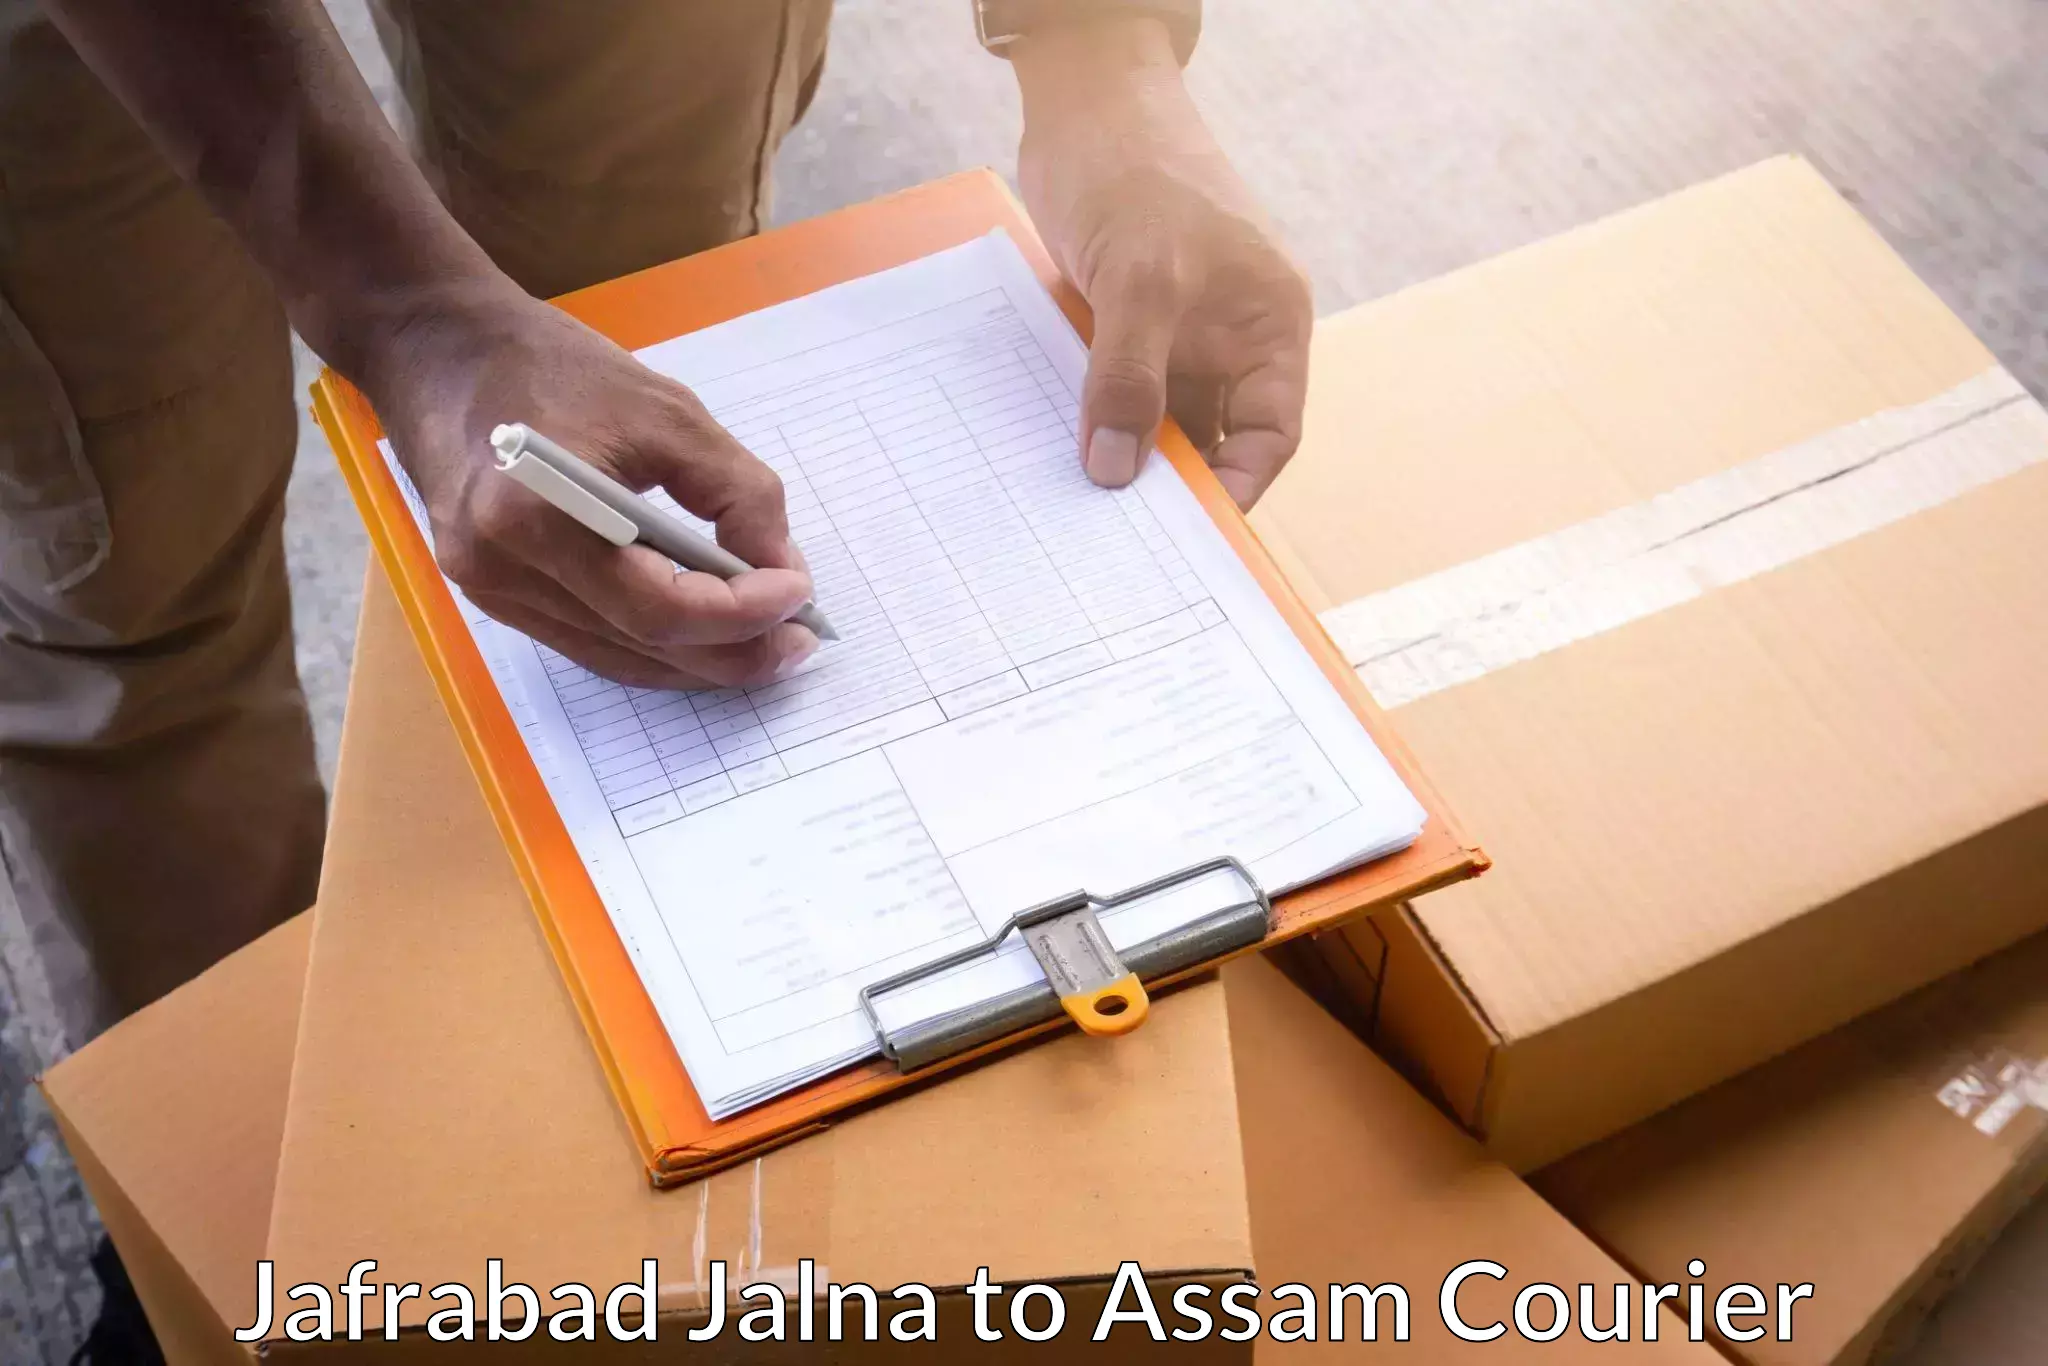 Online courier booking Jafrabad Jalna to Sonari Charaideo